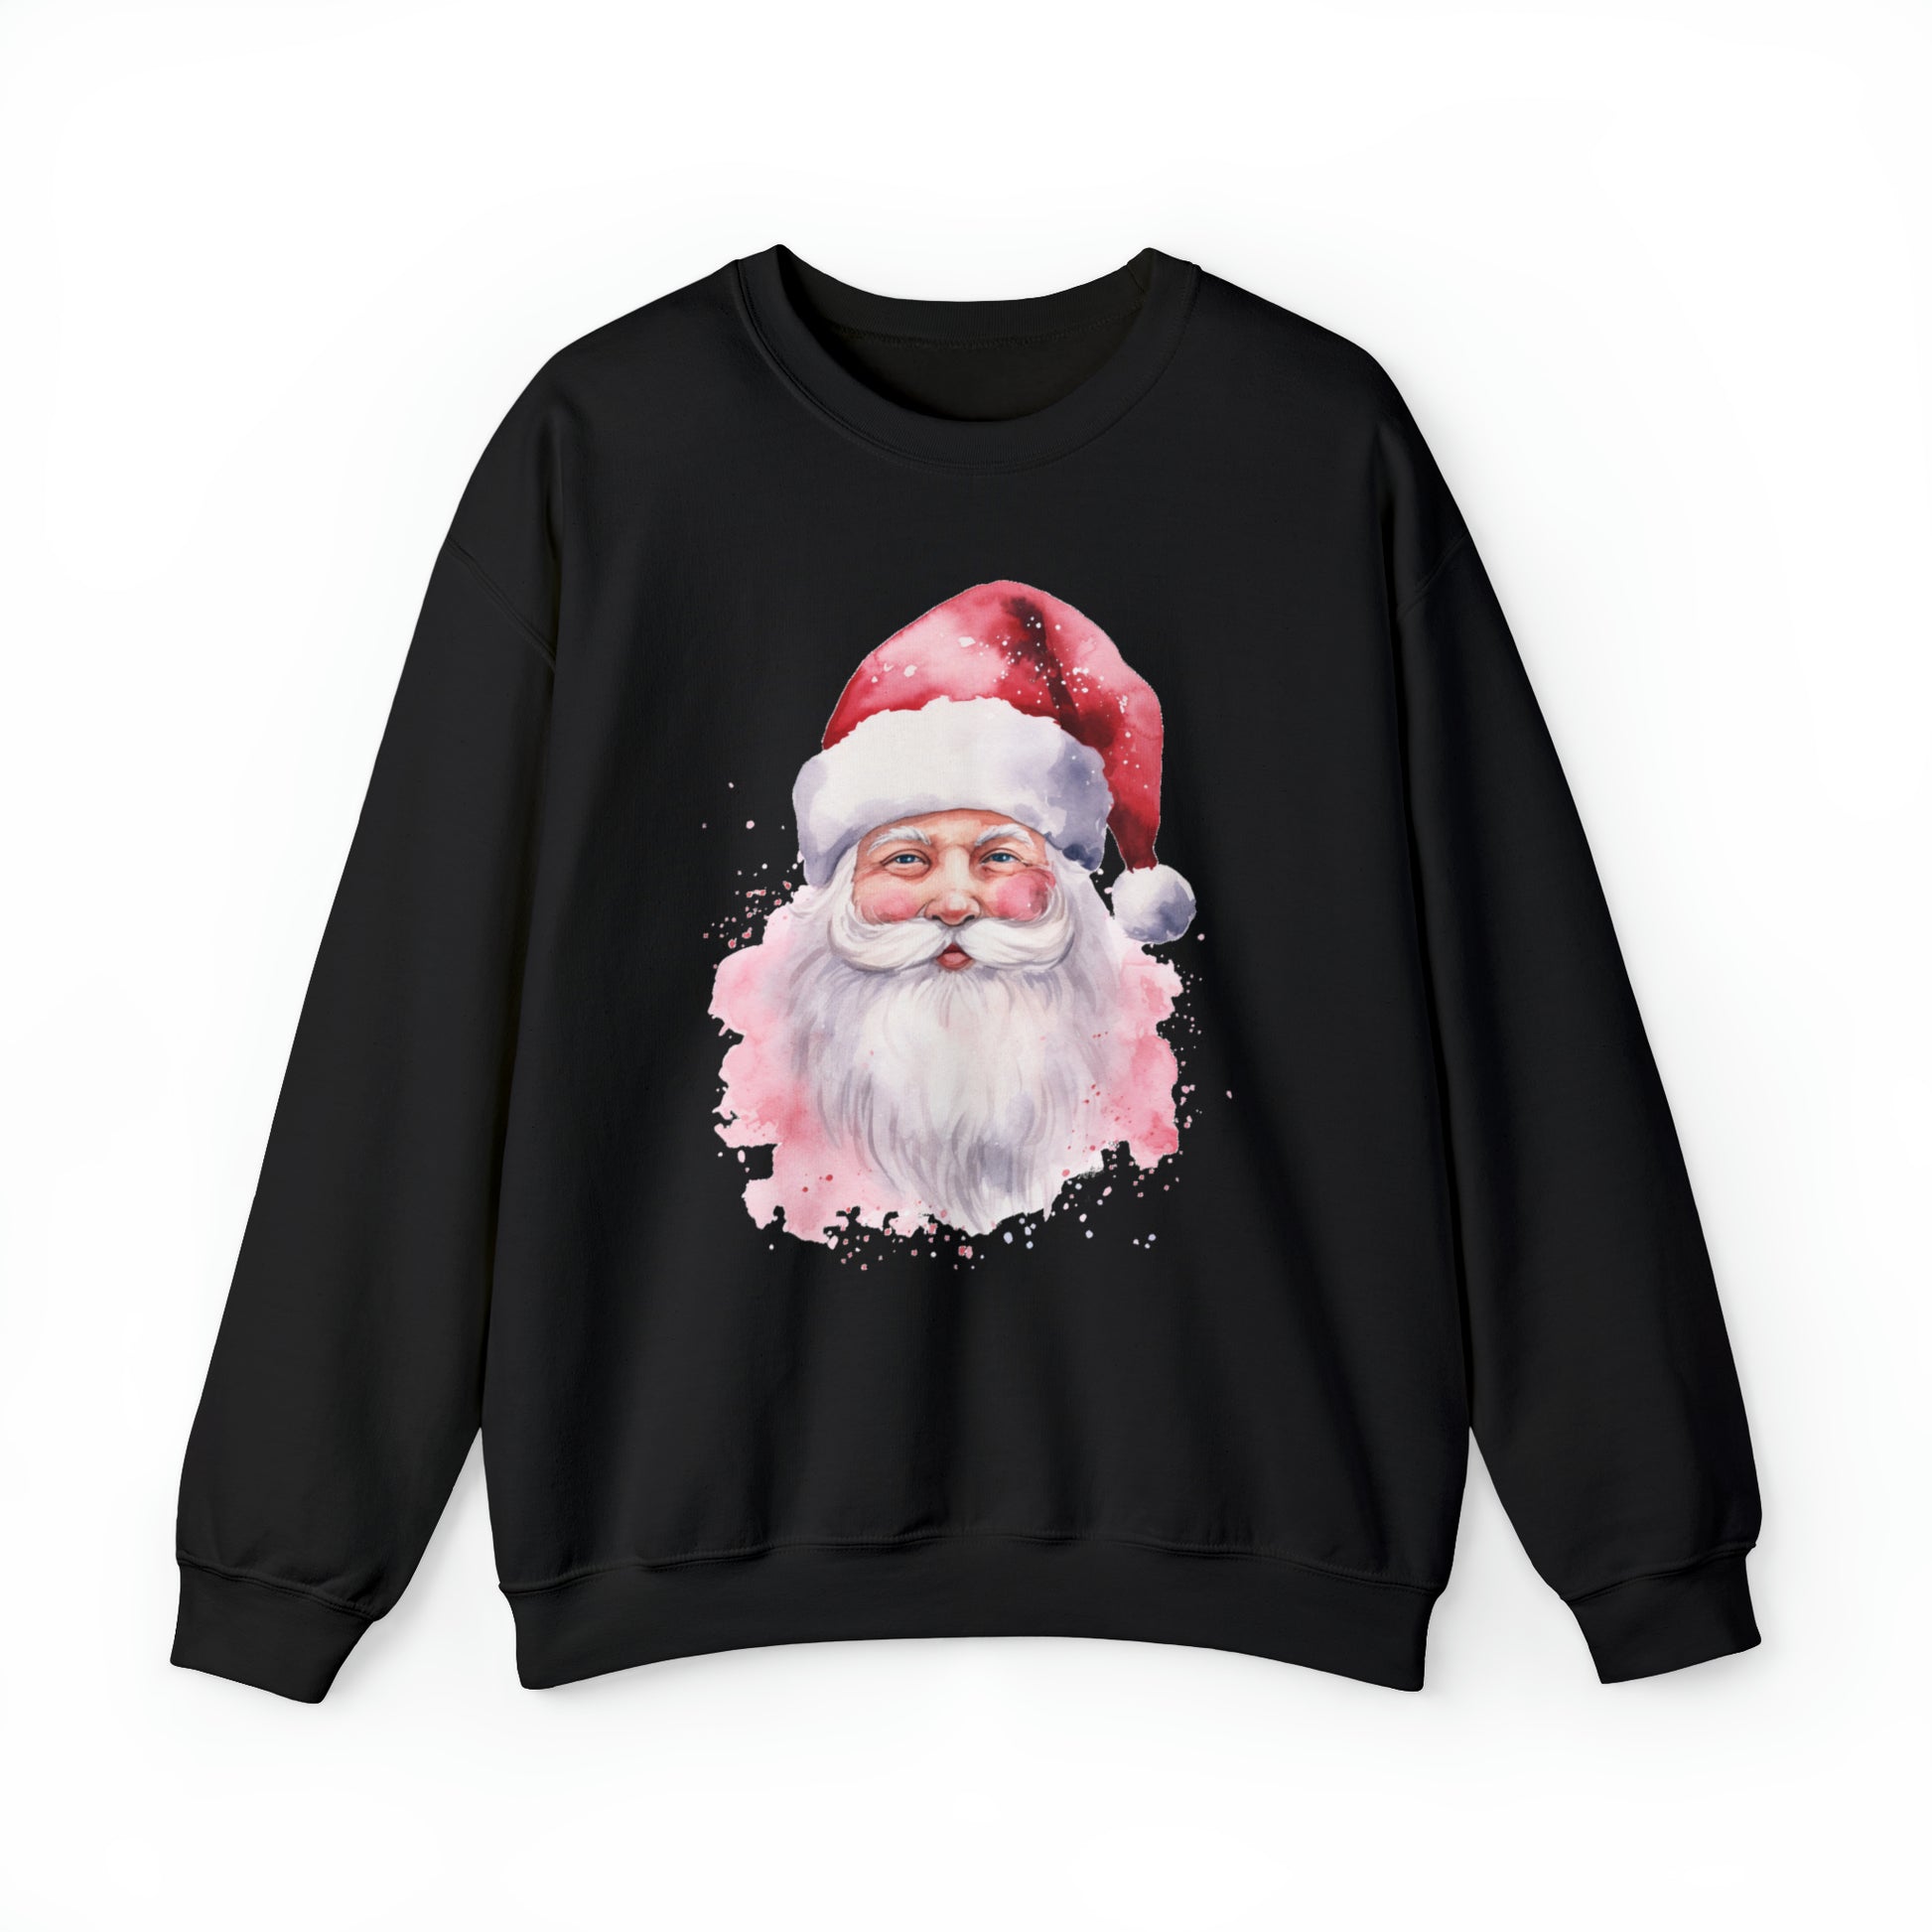 Pink Santa Claus Christmas Sweater,  Xmas Ugly Print Women Men Vintage Funny Party Winter Holiday Outfit Sweatshirt Starcove Fashion